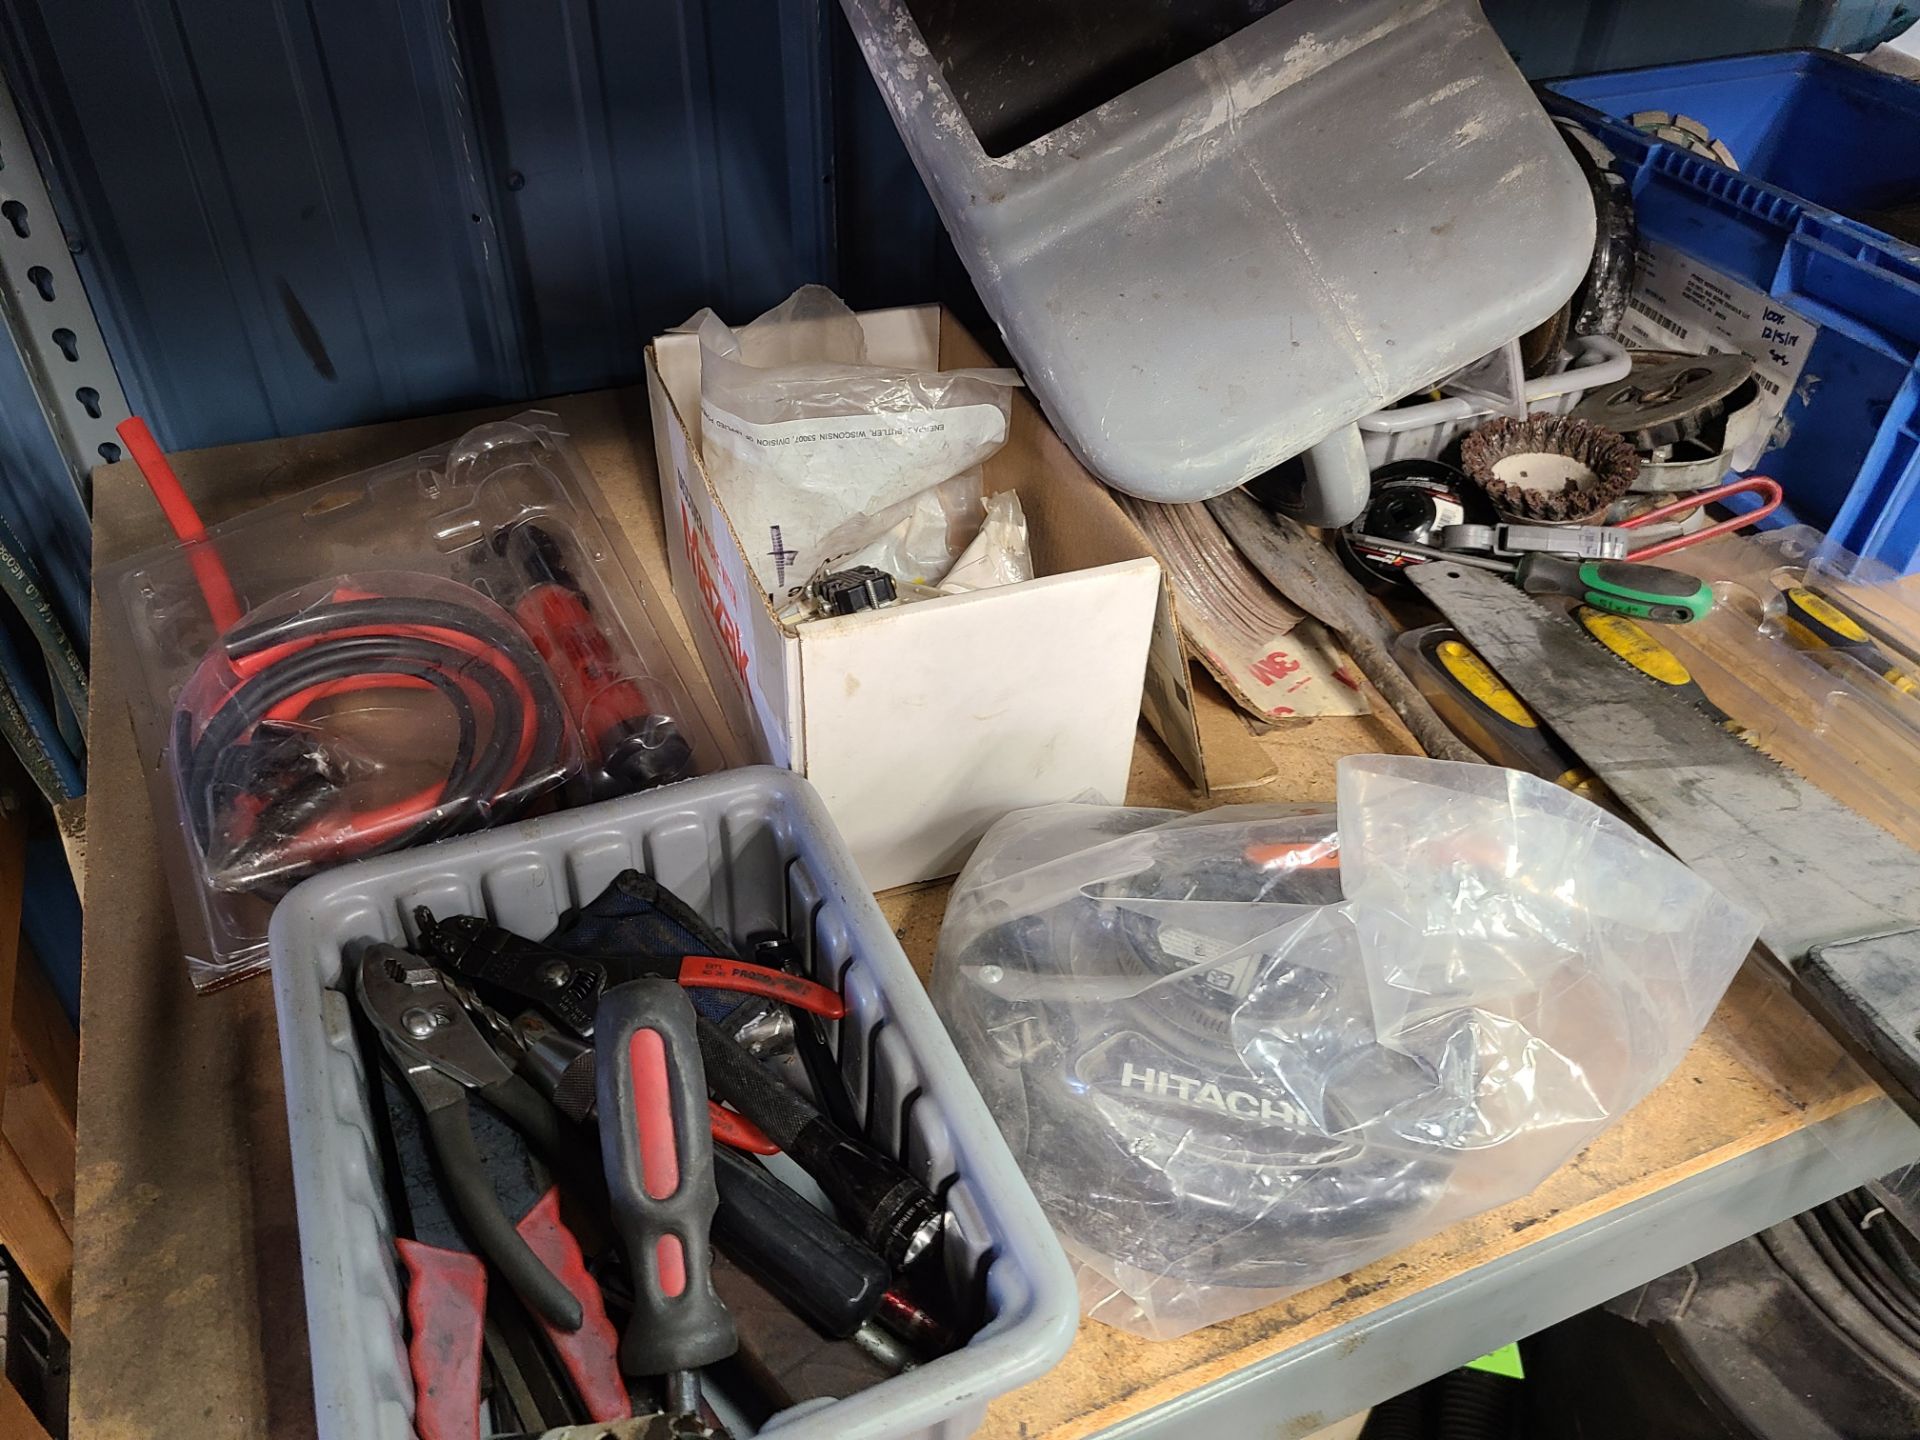 LOT OF MISC TOOLS (SCREWDRIVERS; GRINDER; GRINDING WHEELS; PNEUMATIC TOOLS; SAW) - Image 2 of 4